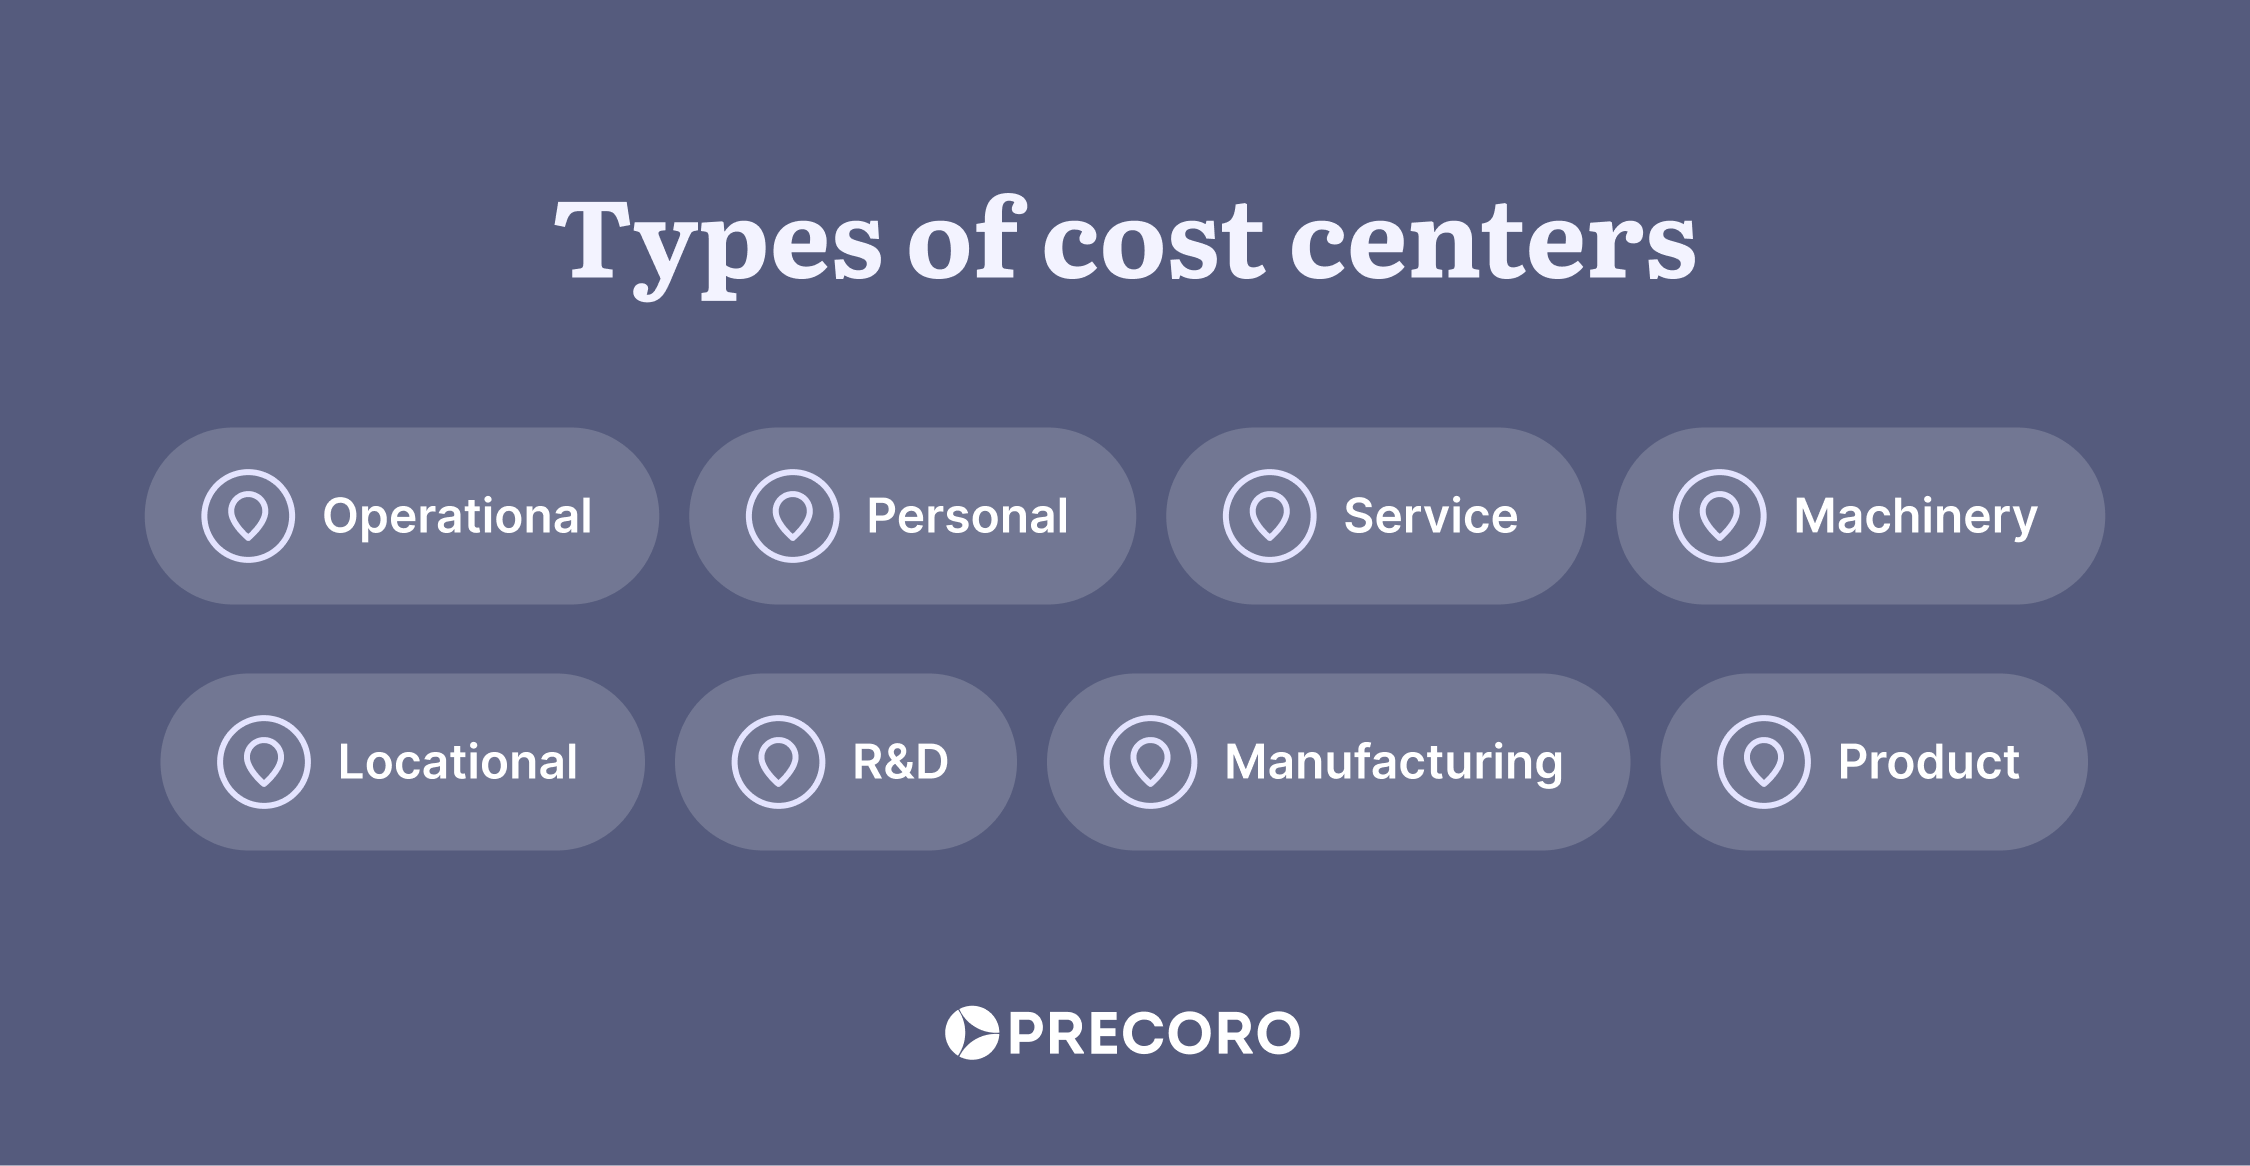 Cost Centers: How to Understand and Optimize Them